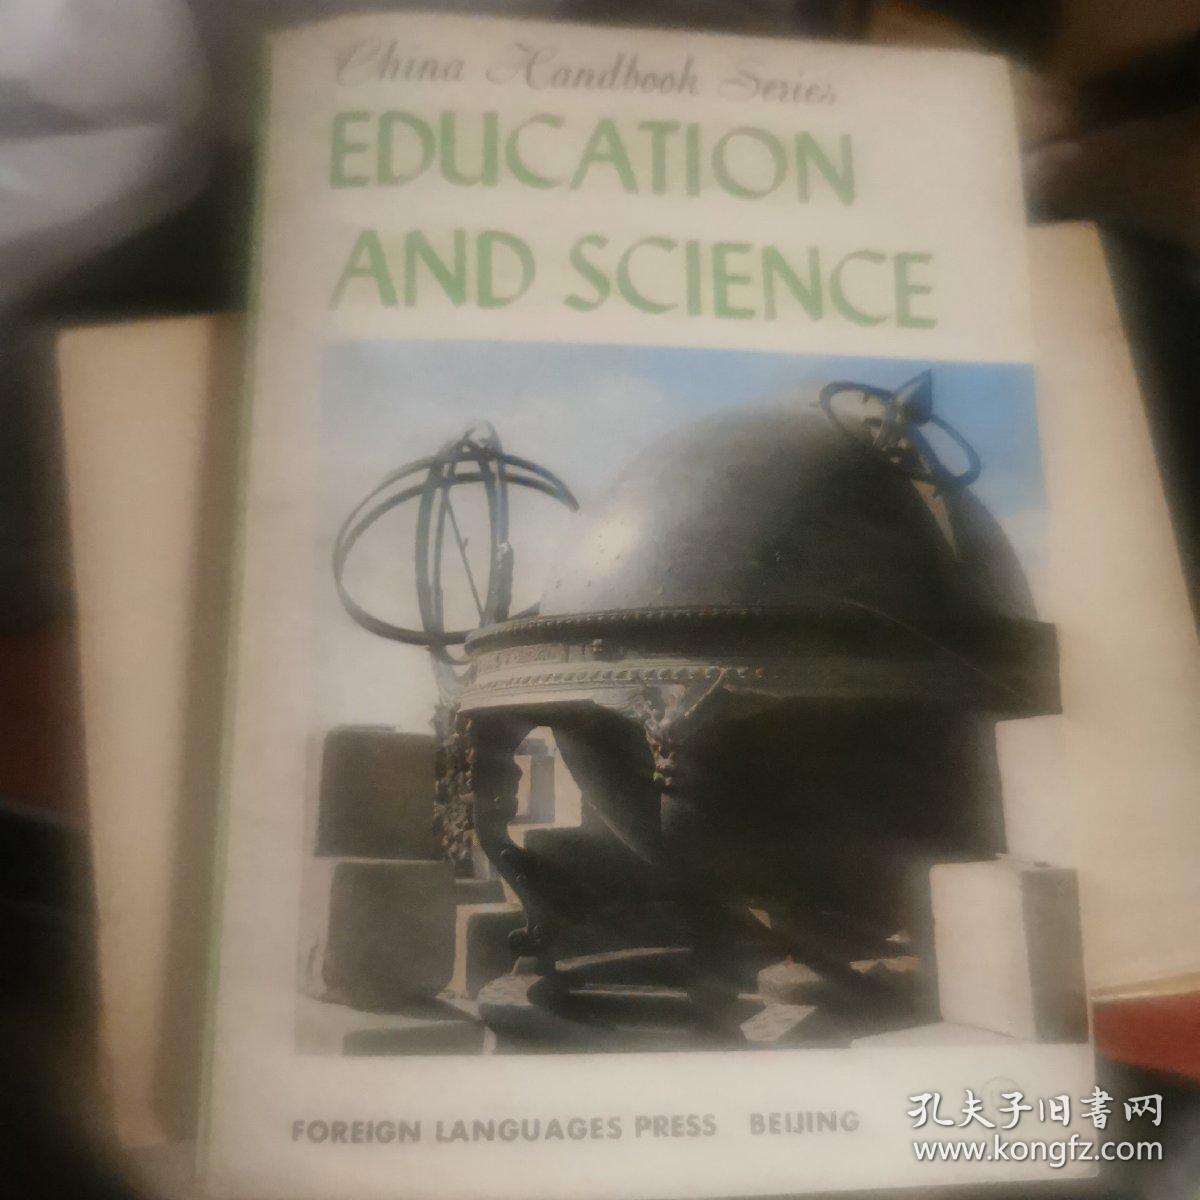 EDUCATION AND SCIENCE